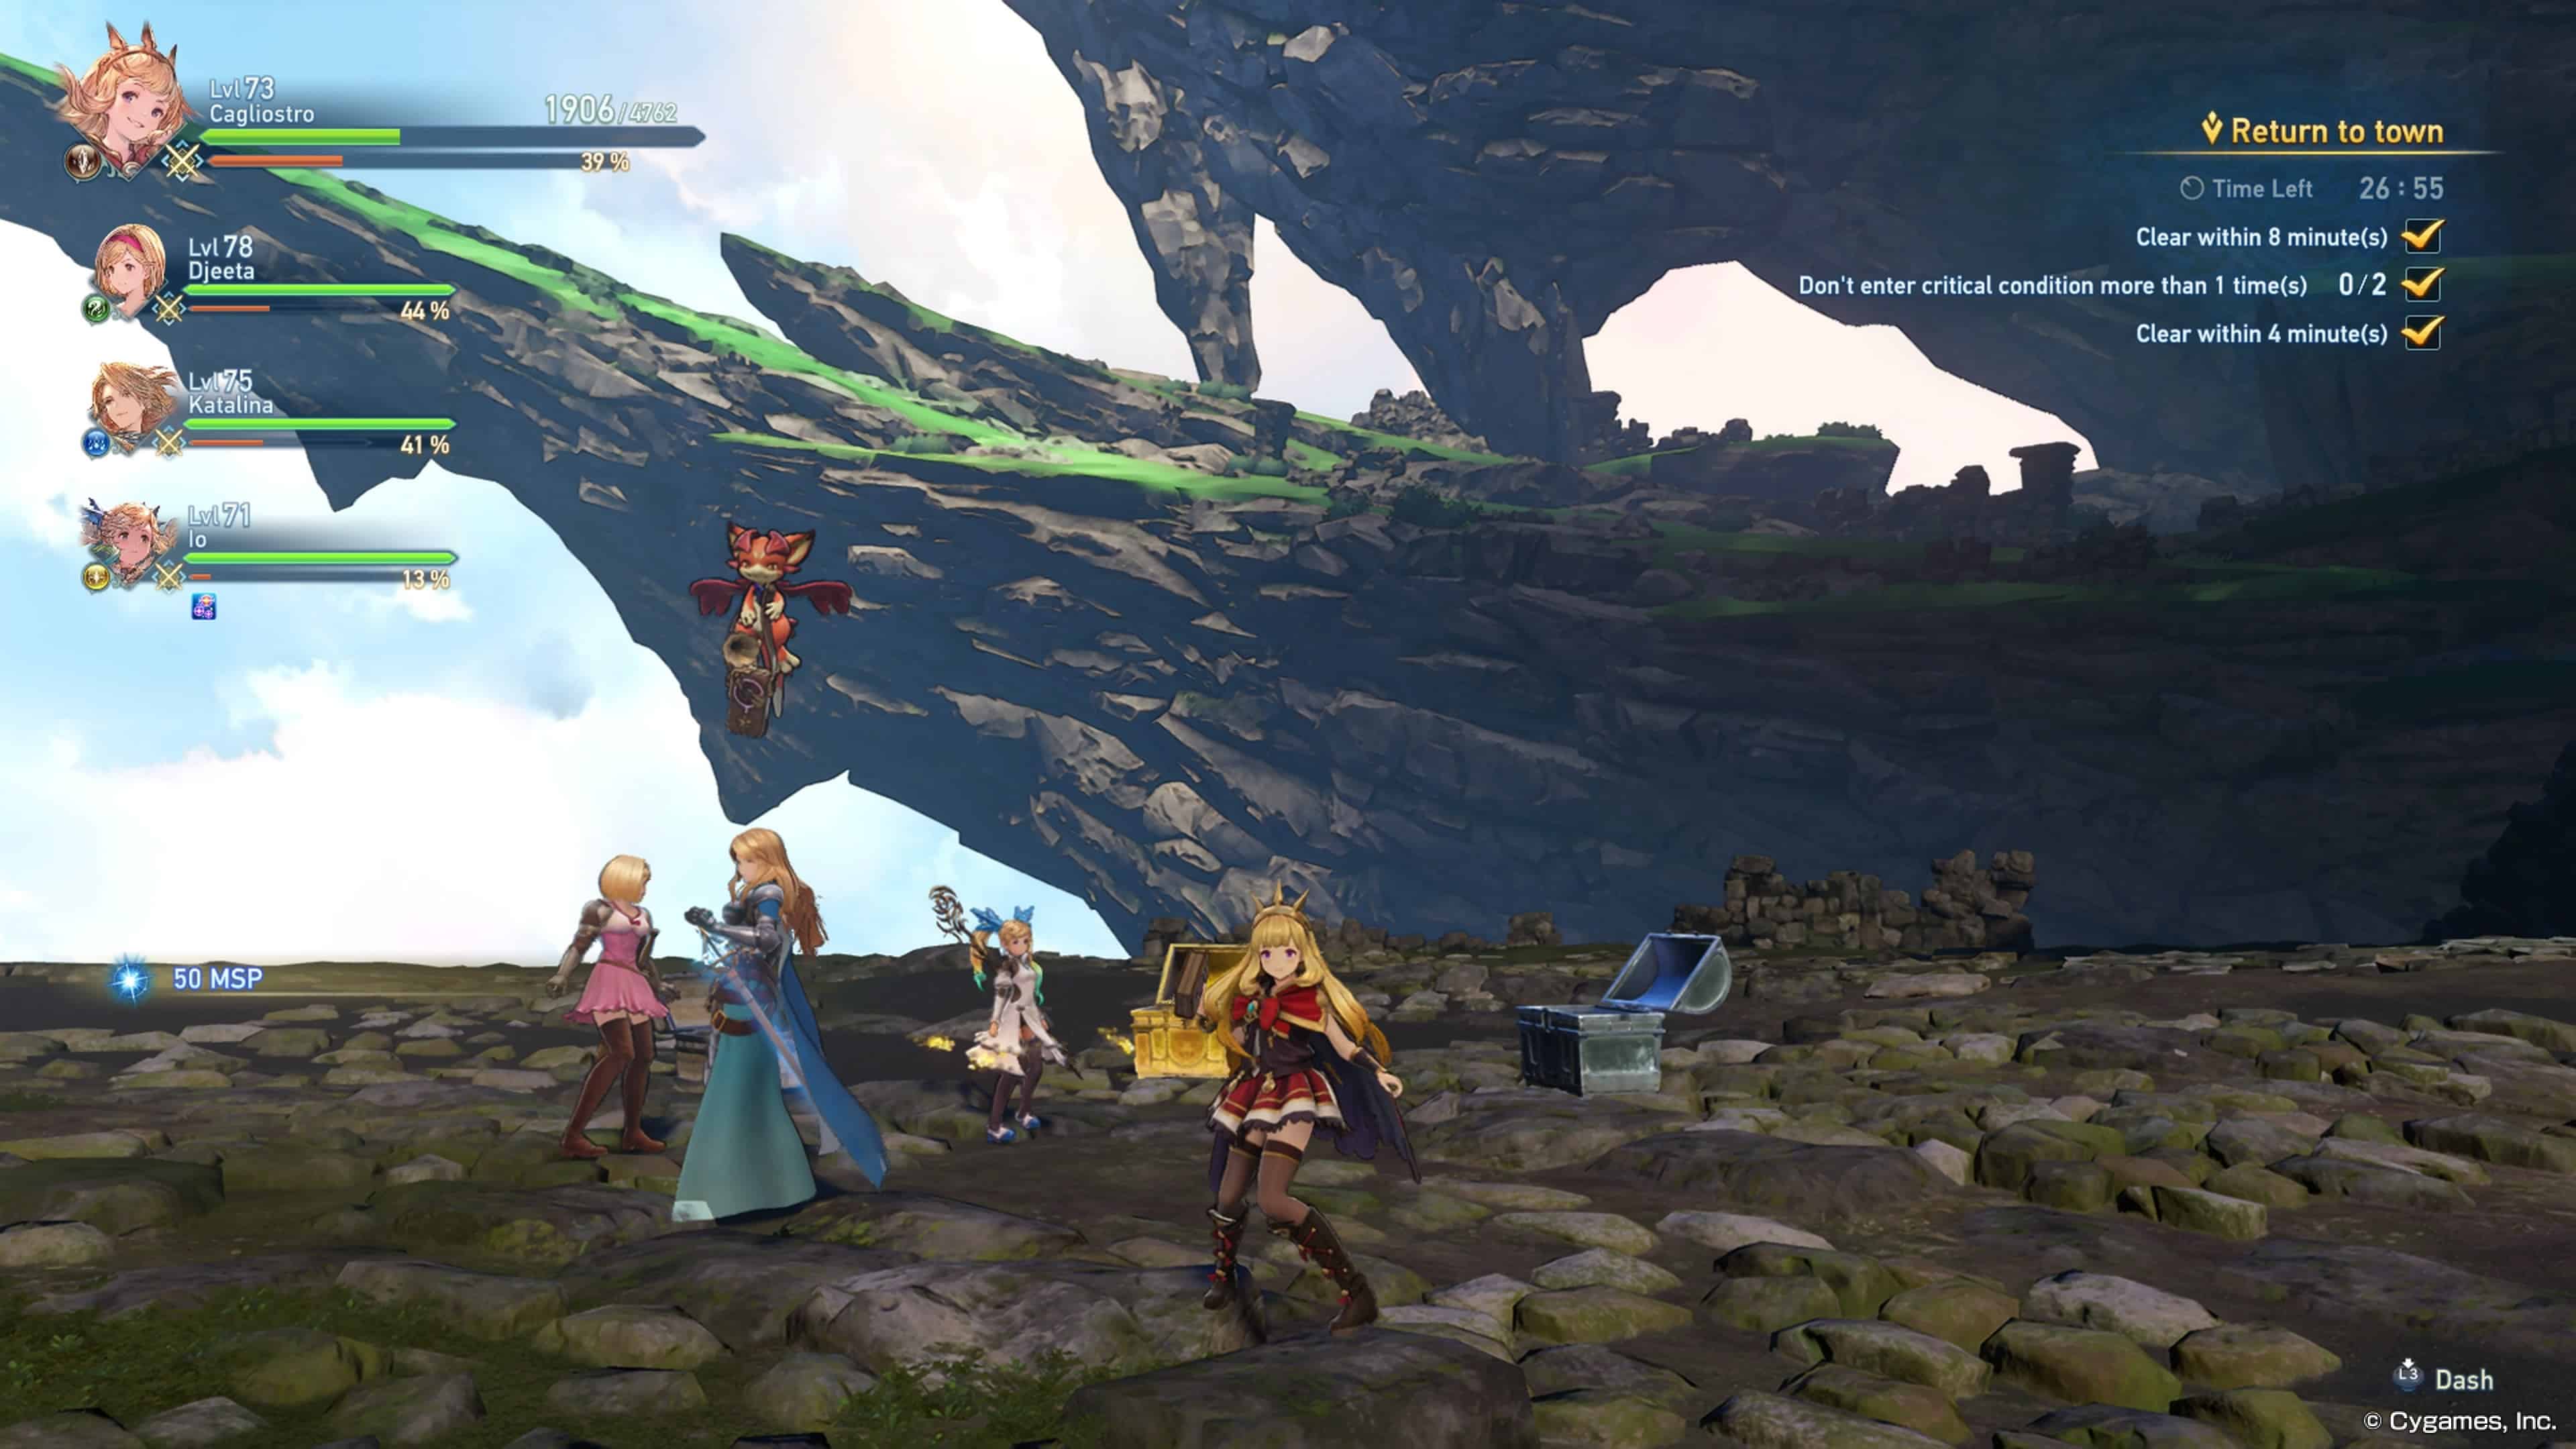 Granblue Fantasy Relink length: The player's party standing on a rocky plain with a cliff in the background.